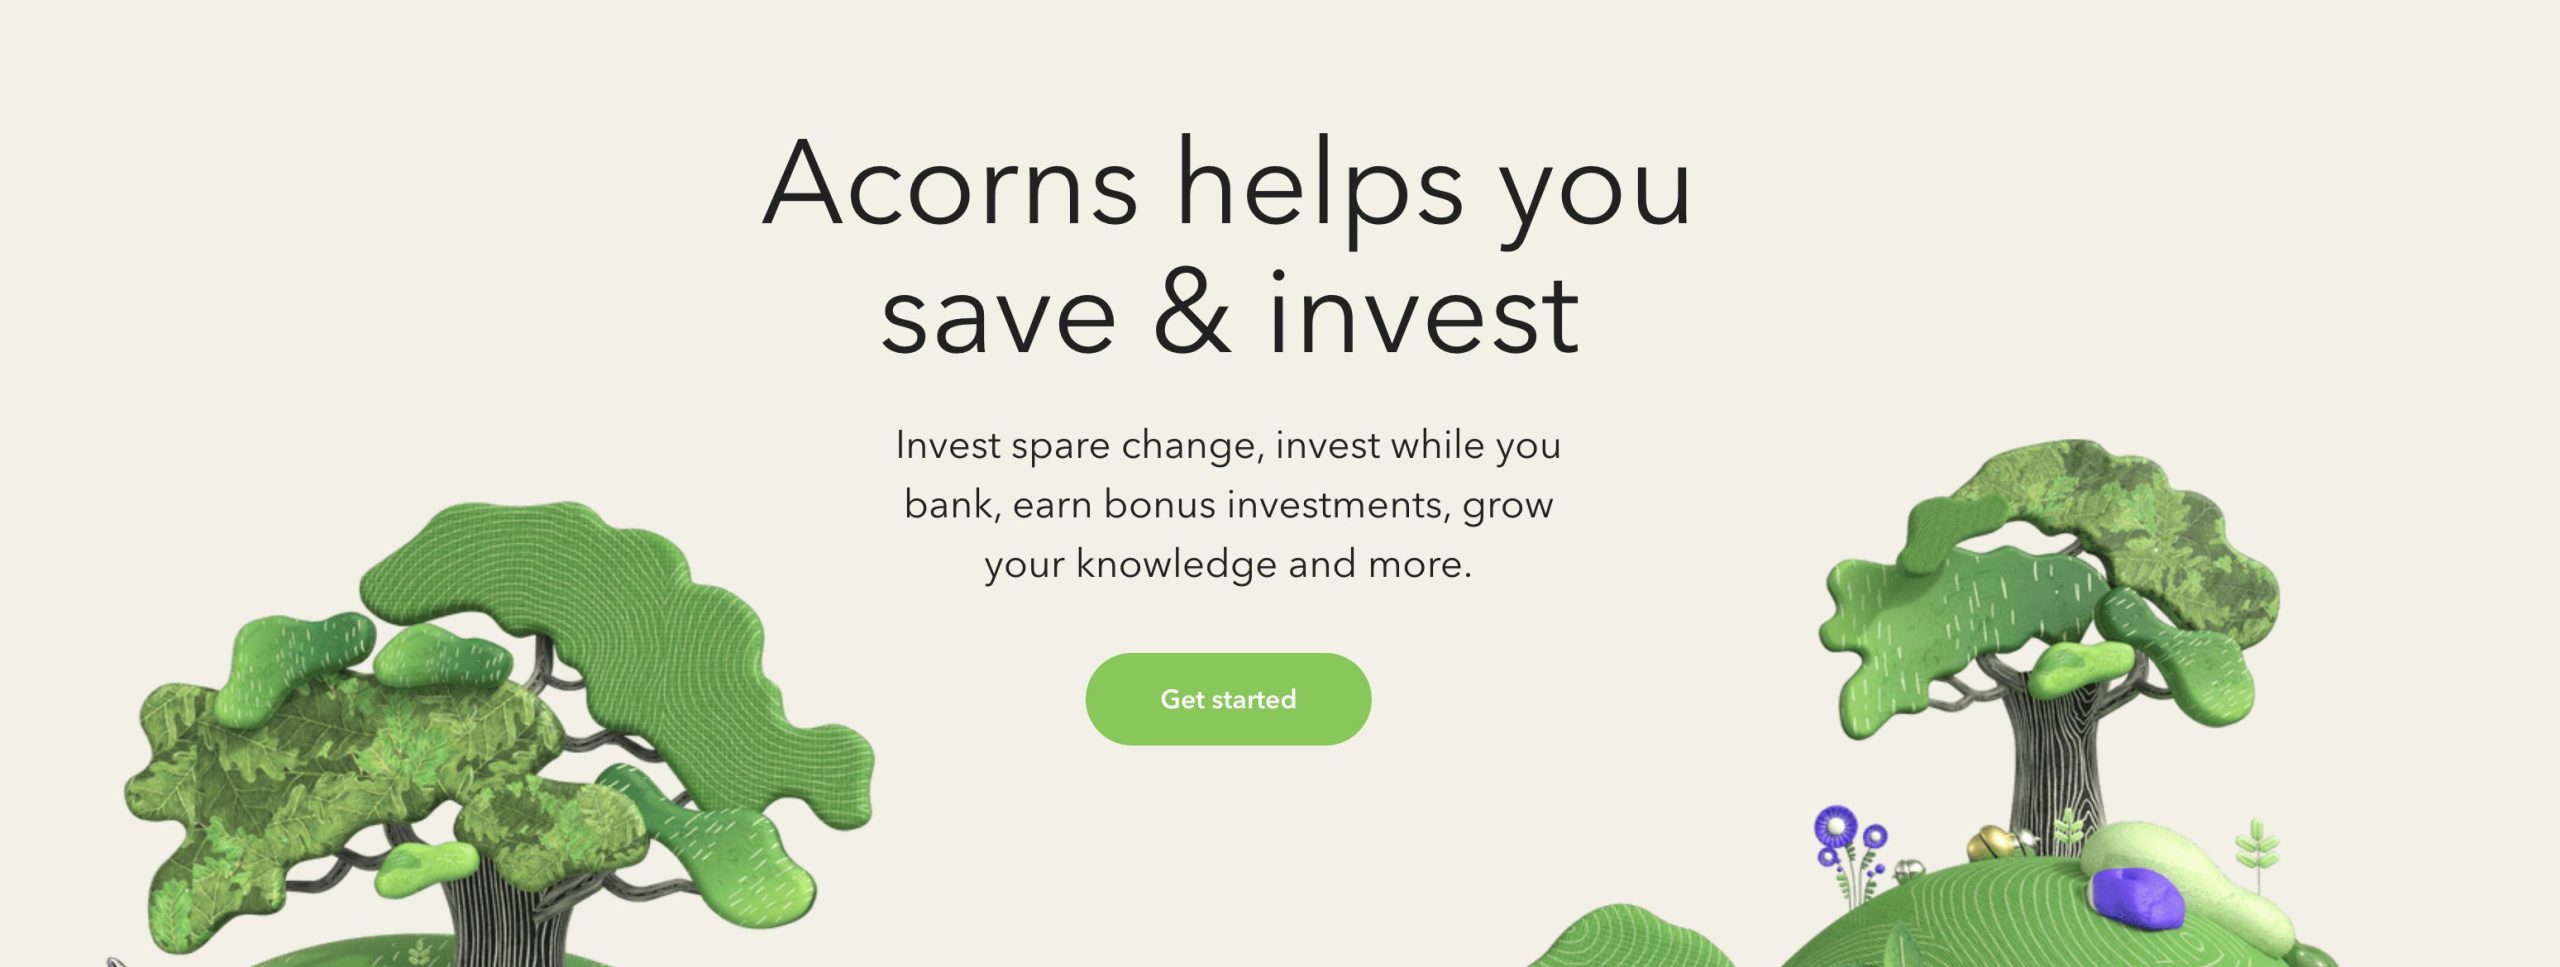 Acorns Launches Acorns Early To Give Every Child Financial Access Beginning  at Birth